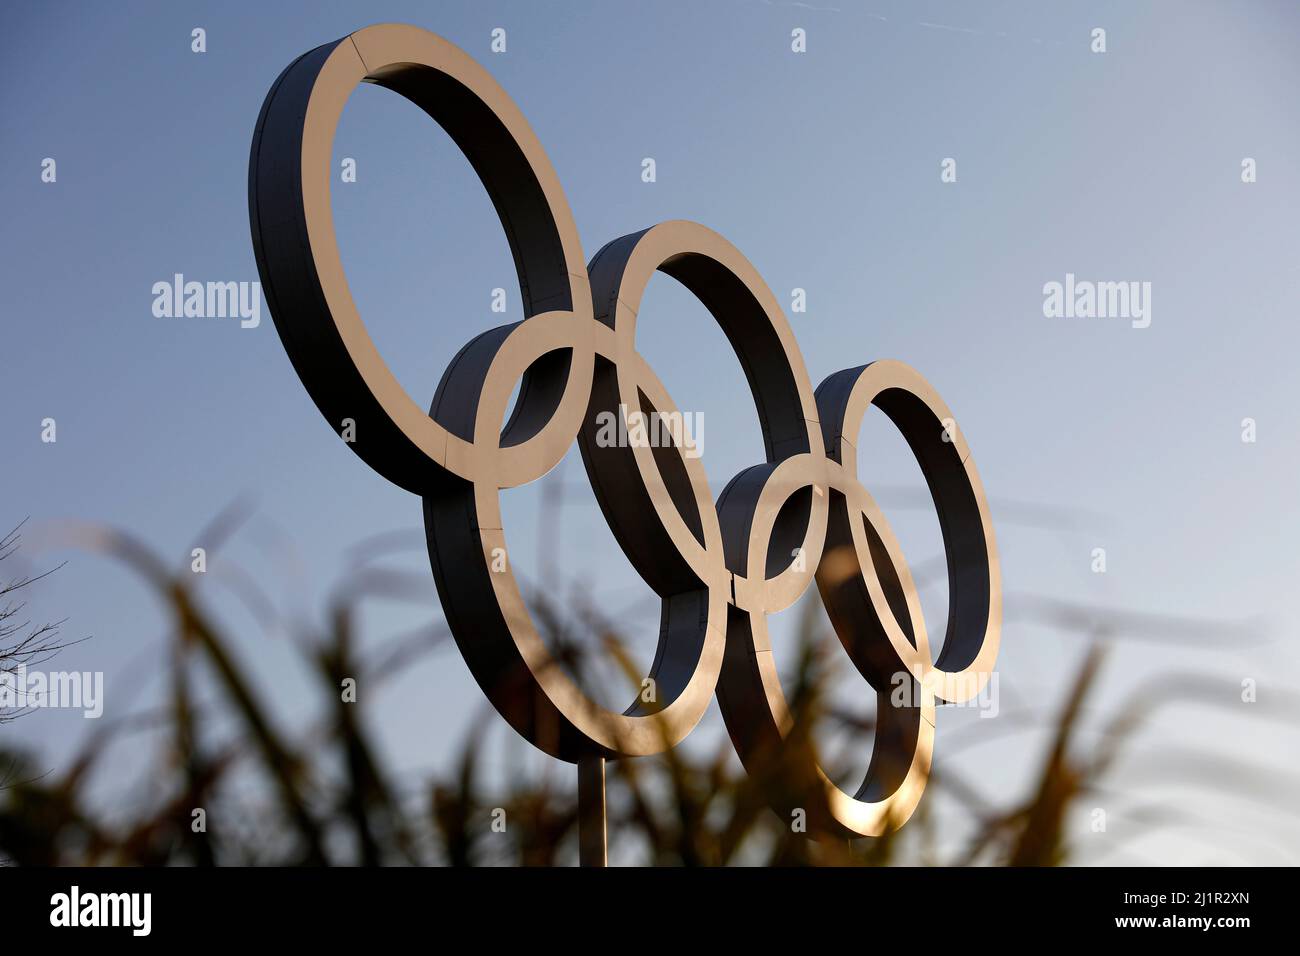 26th March 2022 ; Olympic Rings Lee Valley, Stratford England; Reflection of the locations used for 2012 Summer Olympics London; Olympic rings symbol at Queen Elizabeth Olympic Park Stock Photo